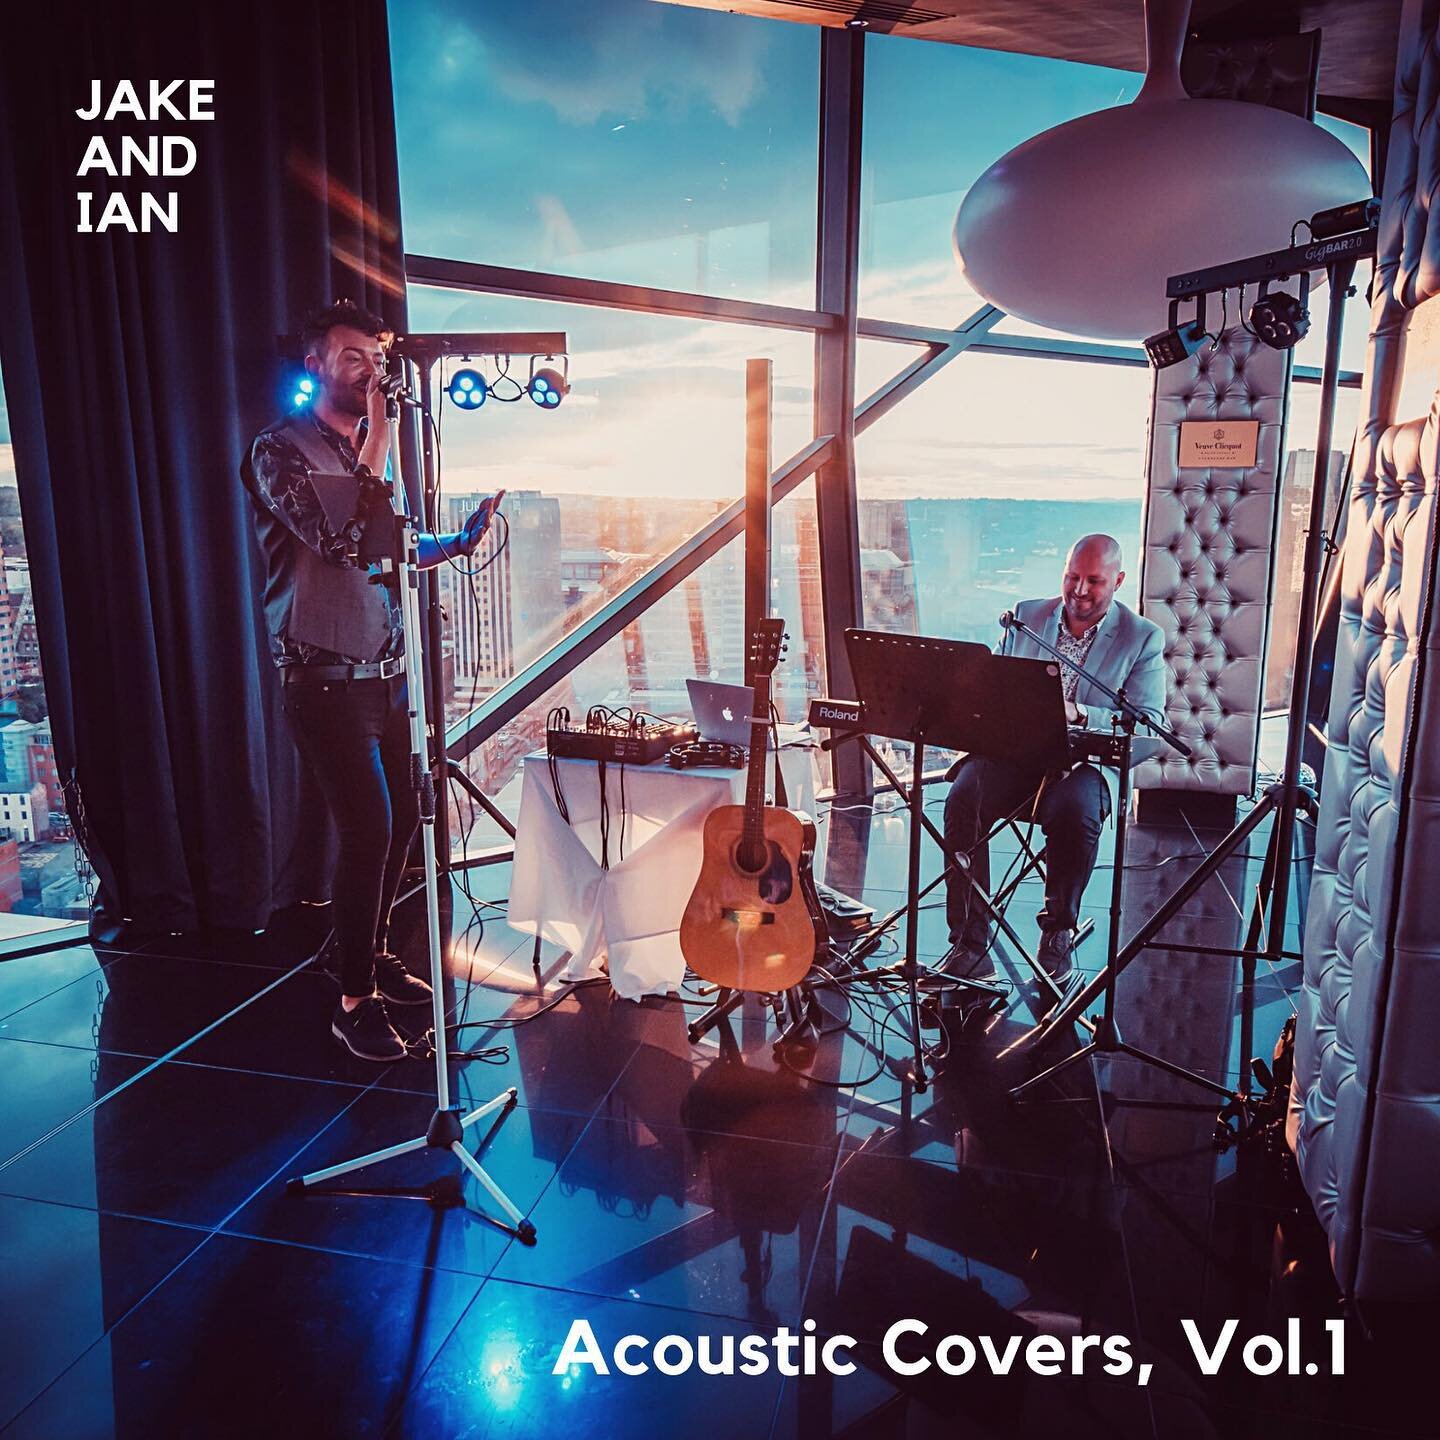 A big thank you to everyone who has downloaded, purchased, streamed and Shazam&rsquo;d our new EP. Now Available on Spotify, Amazon, iTunes, Apple Music etc

#wedding #jakeandianband #weddingparty #covers #celebration #bride #groom #weddingparty #wed